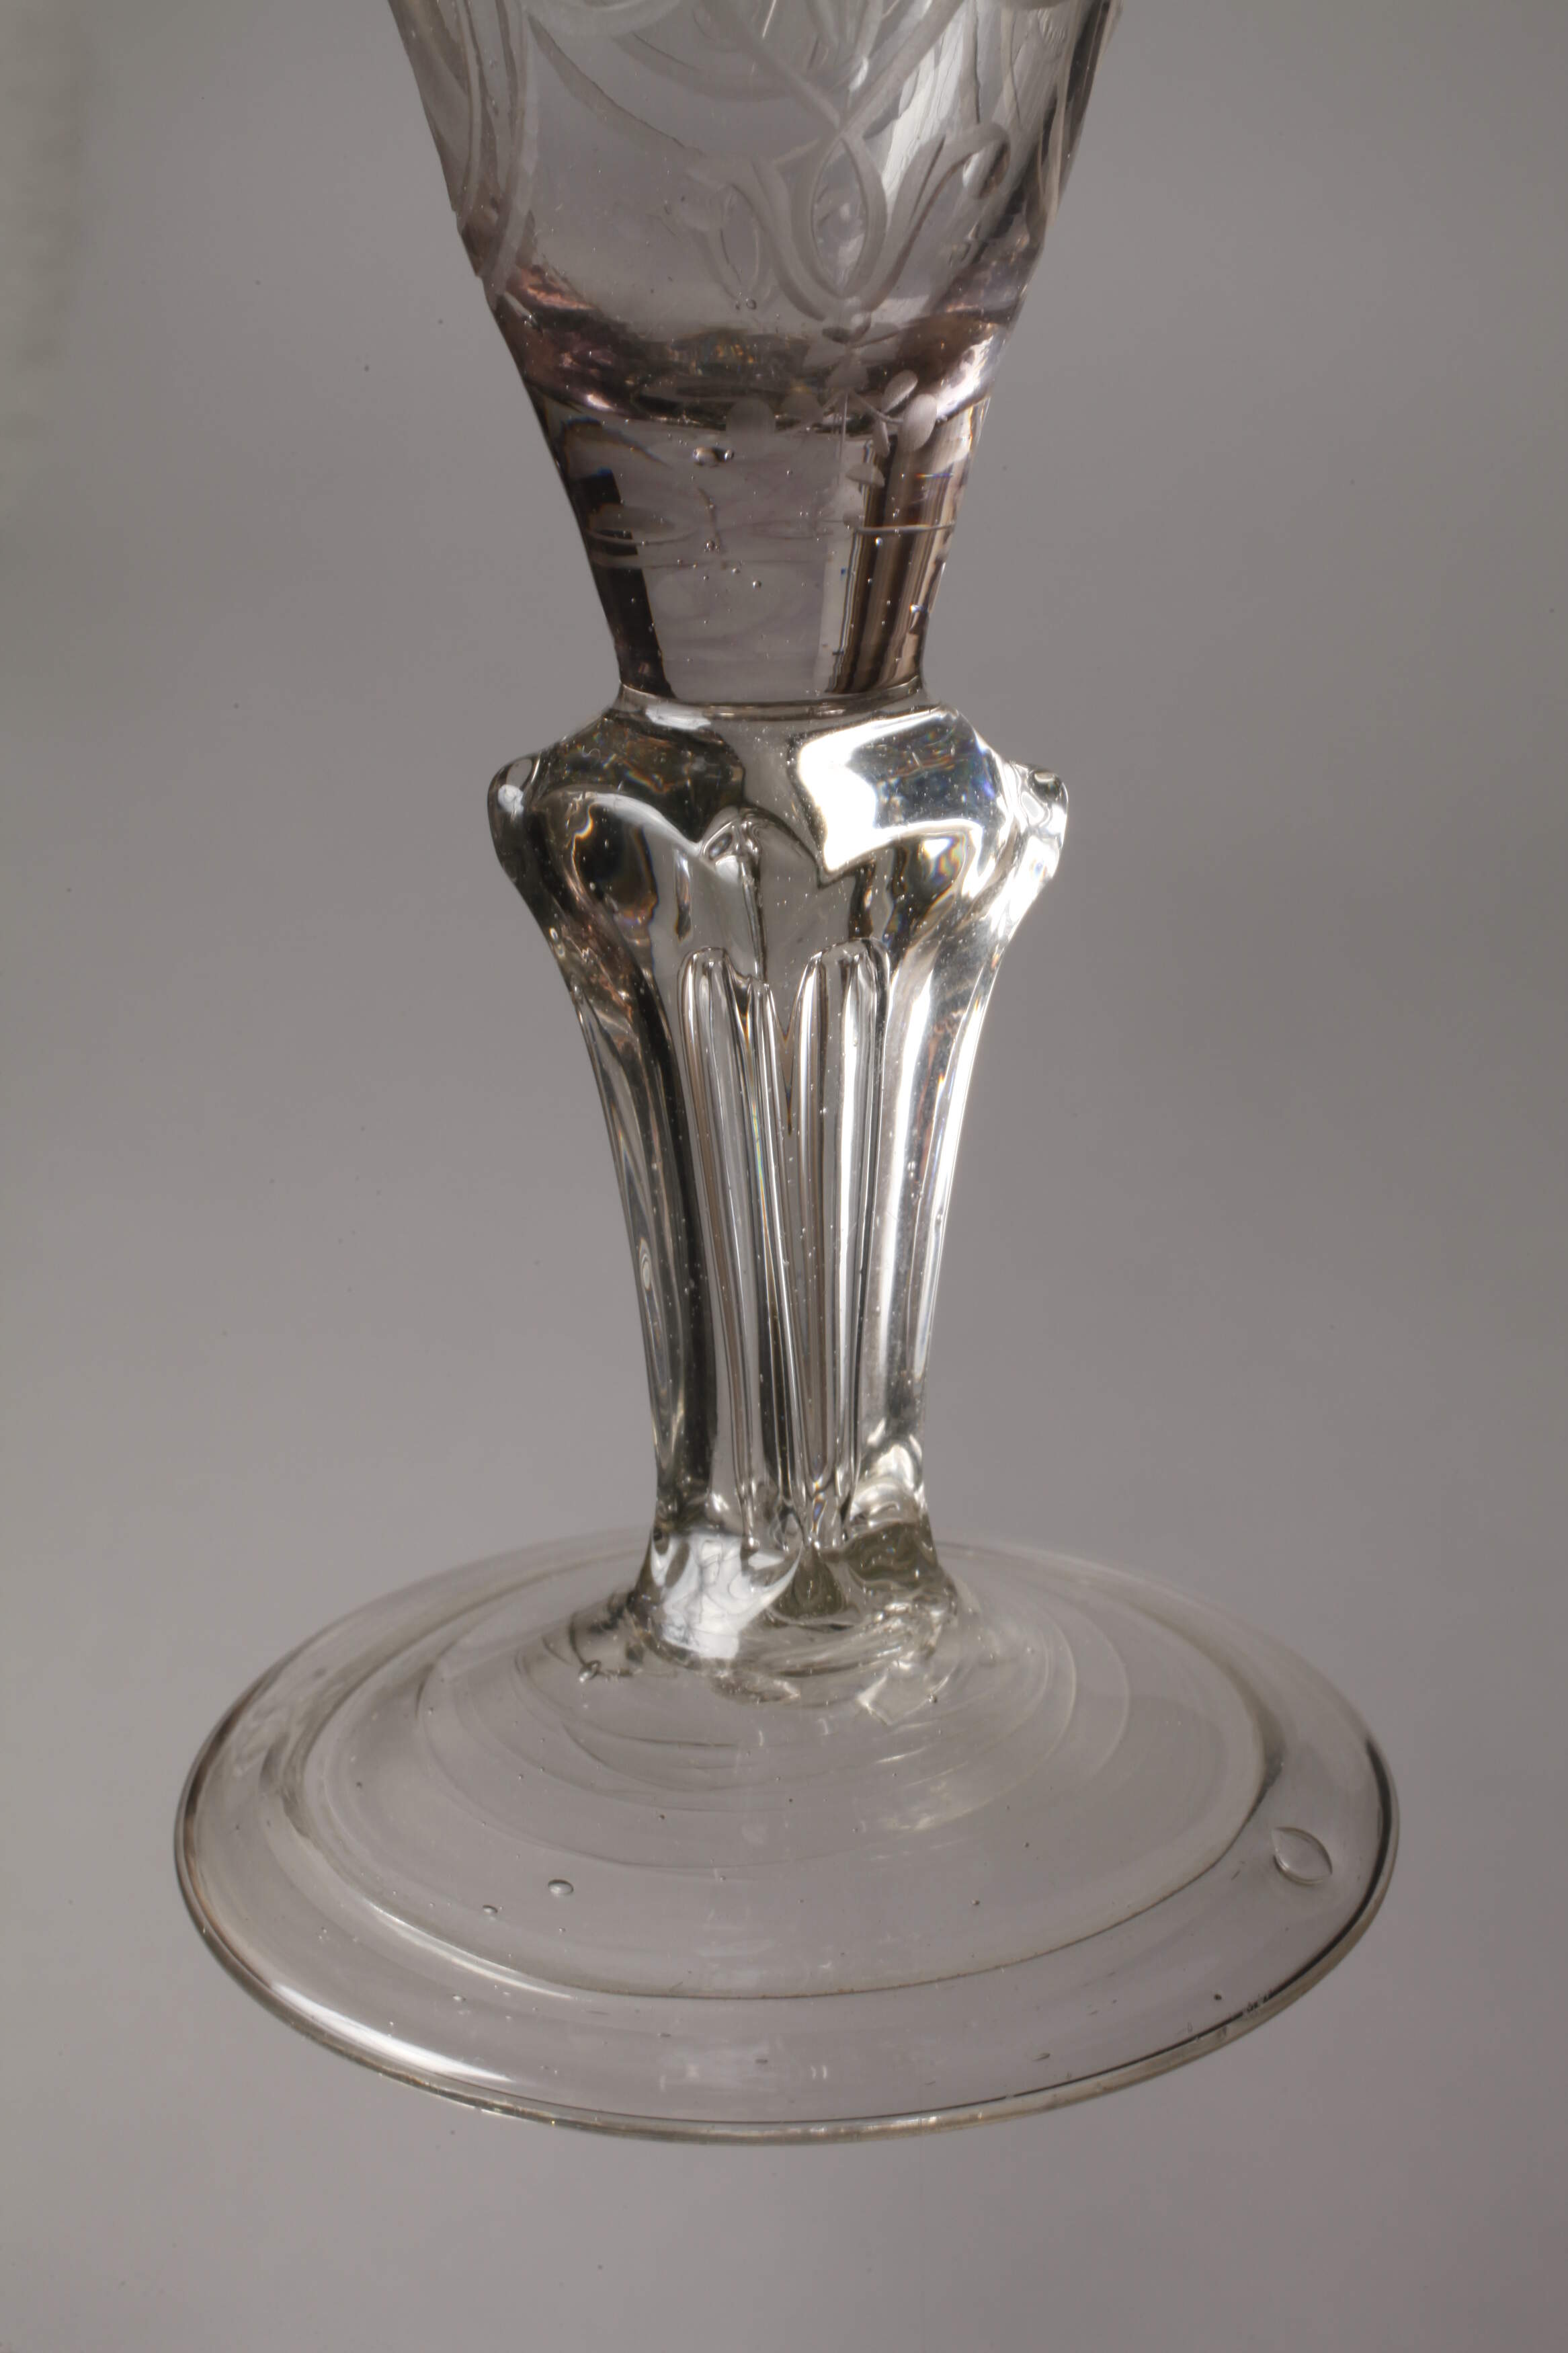 Spouted goblet from the Prussian royal house - Image 6 of 6